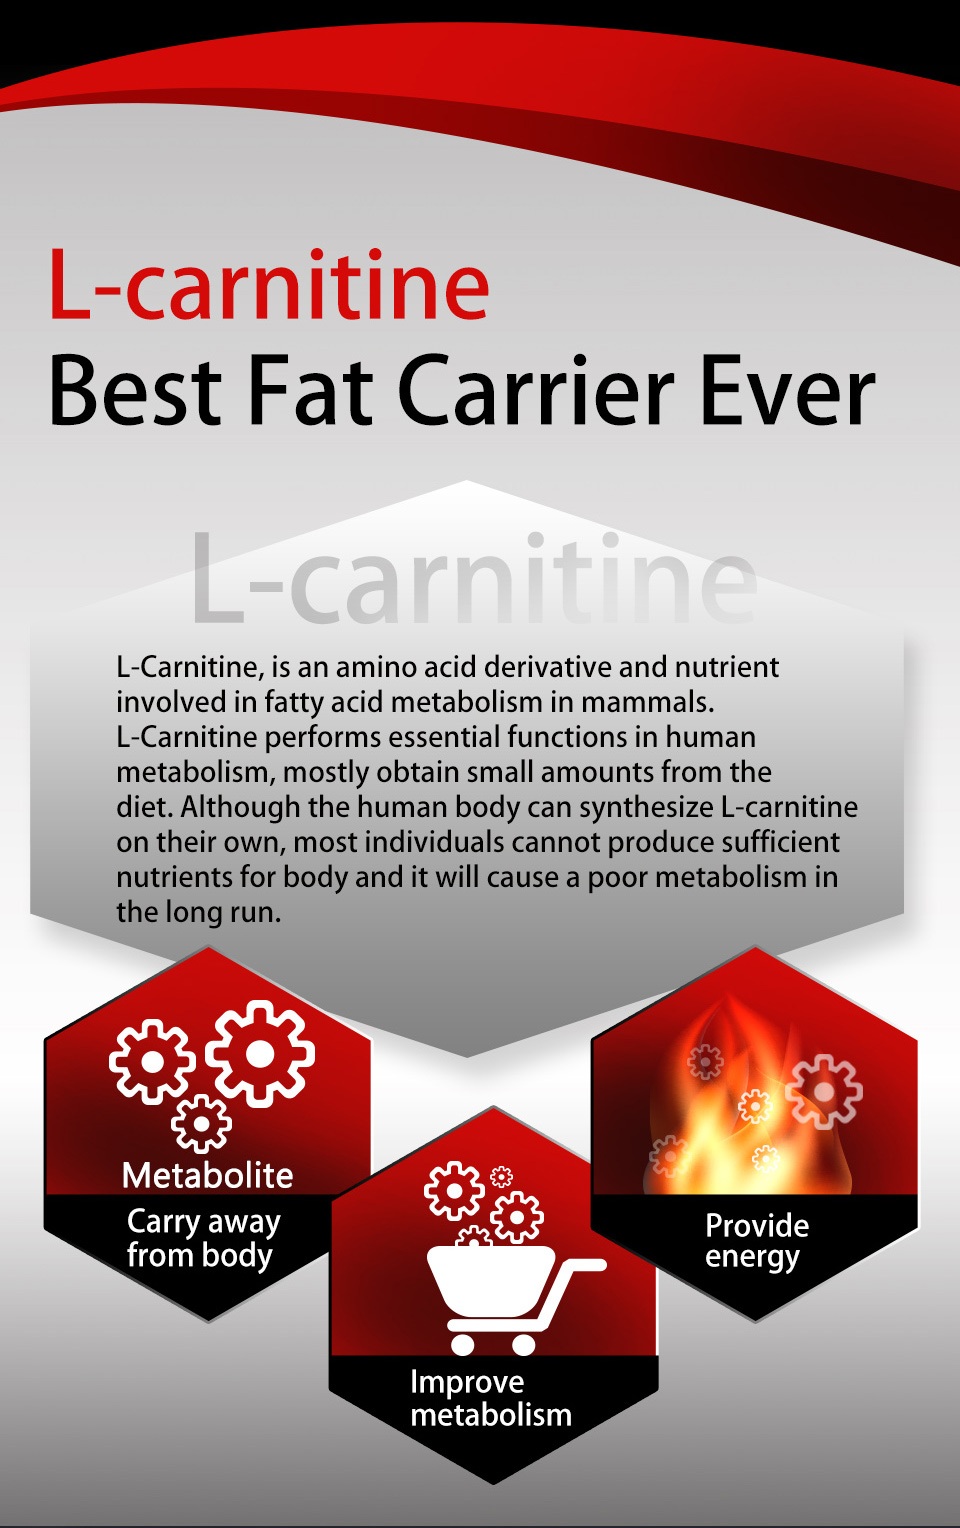 UNIQMAN L-carnitine contains vitamin B complex to enhance the immune system and heart health